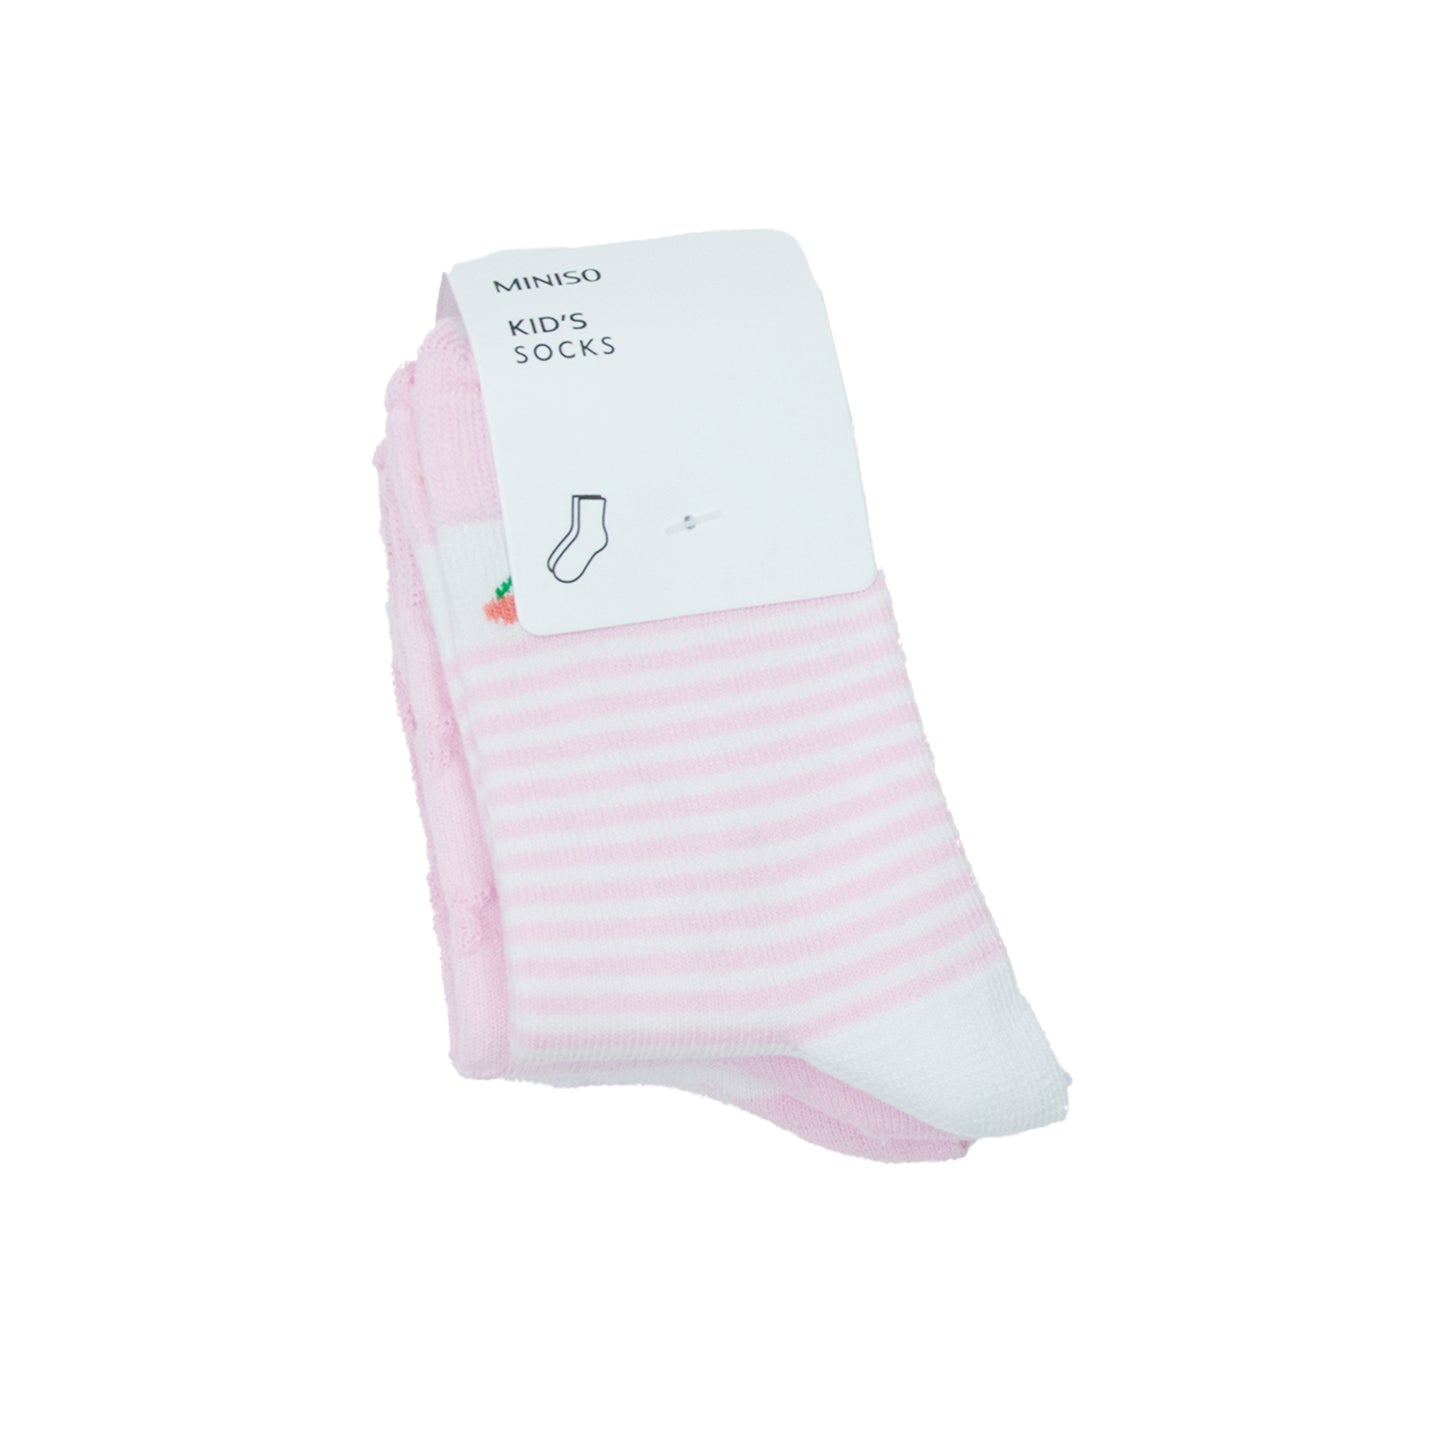 Kids socks pack of 3 KCD-012 size 4 to 6